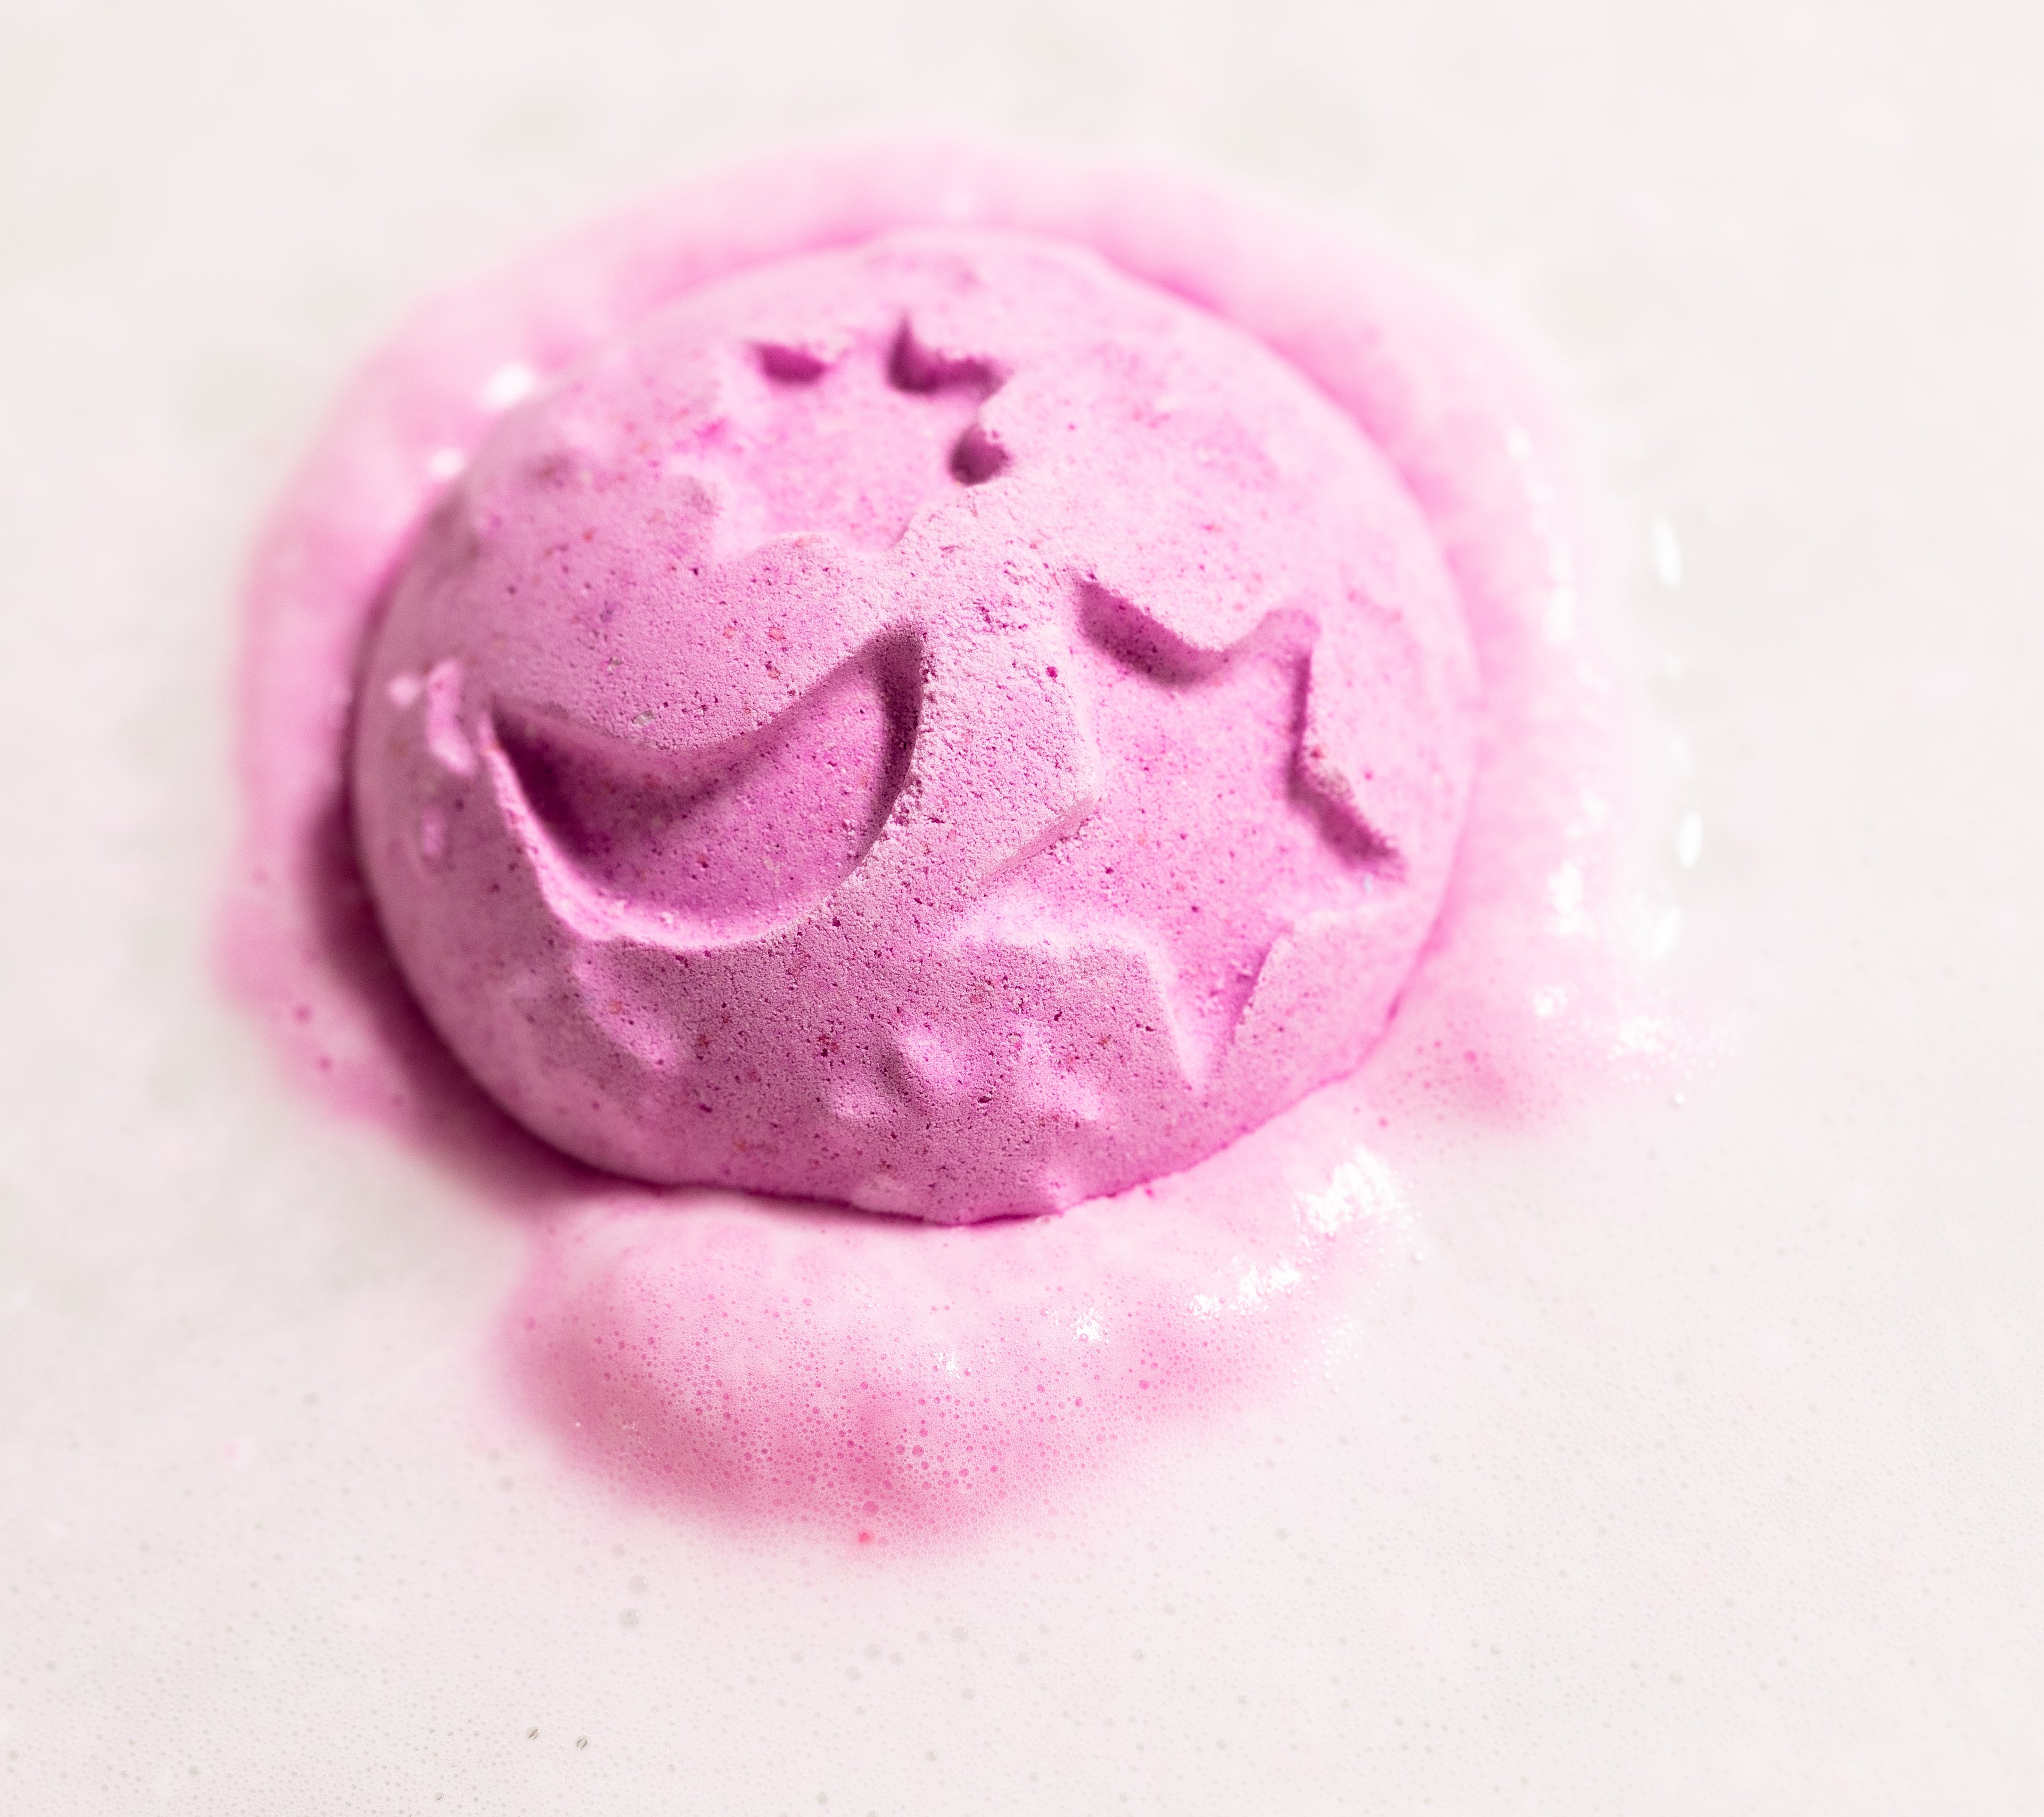 Deep pink Twilight bath bomb sitting in the water surrounded by soft, foamy, pastel pink bubbles.